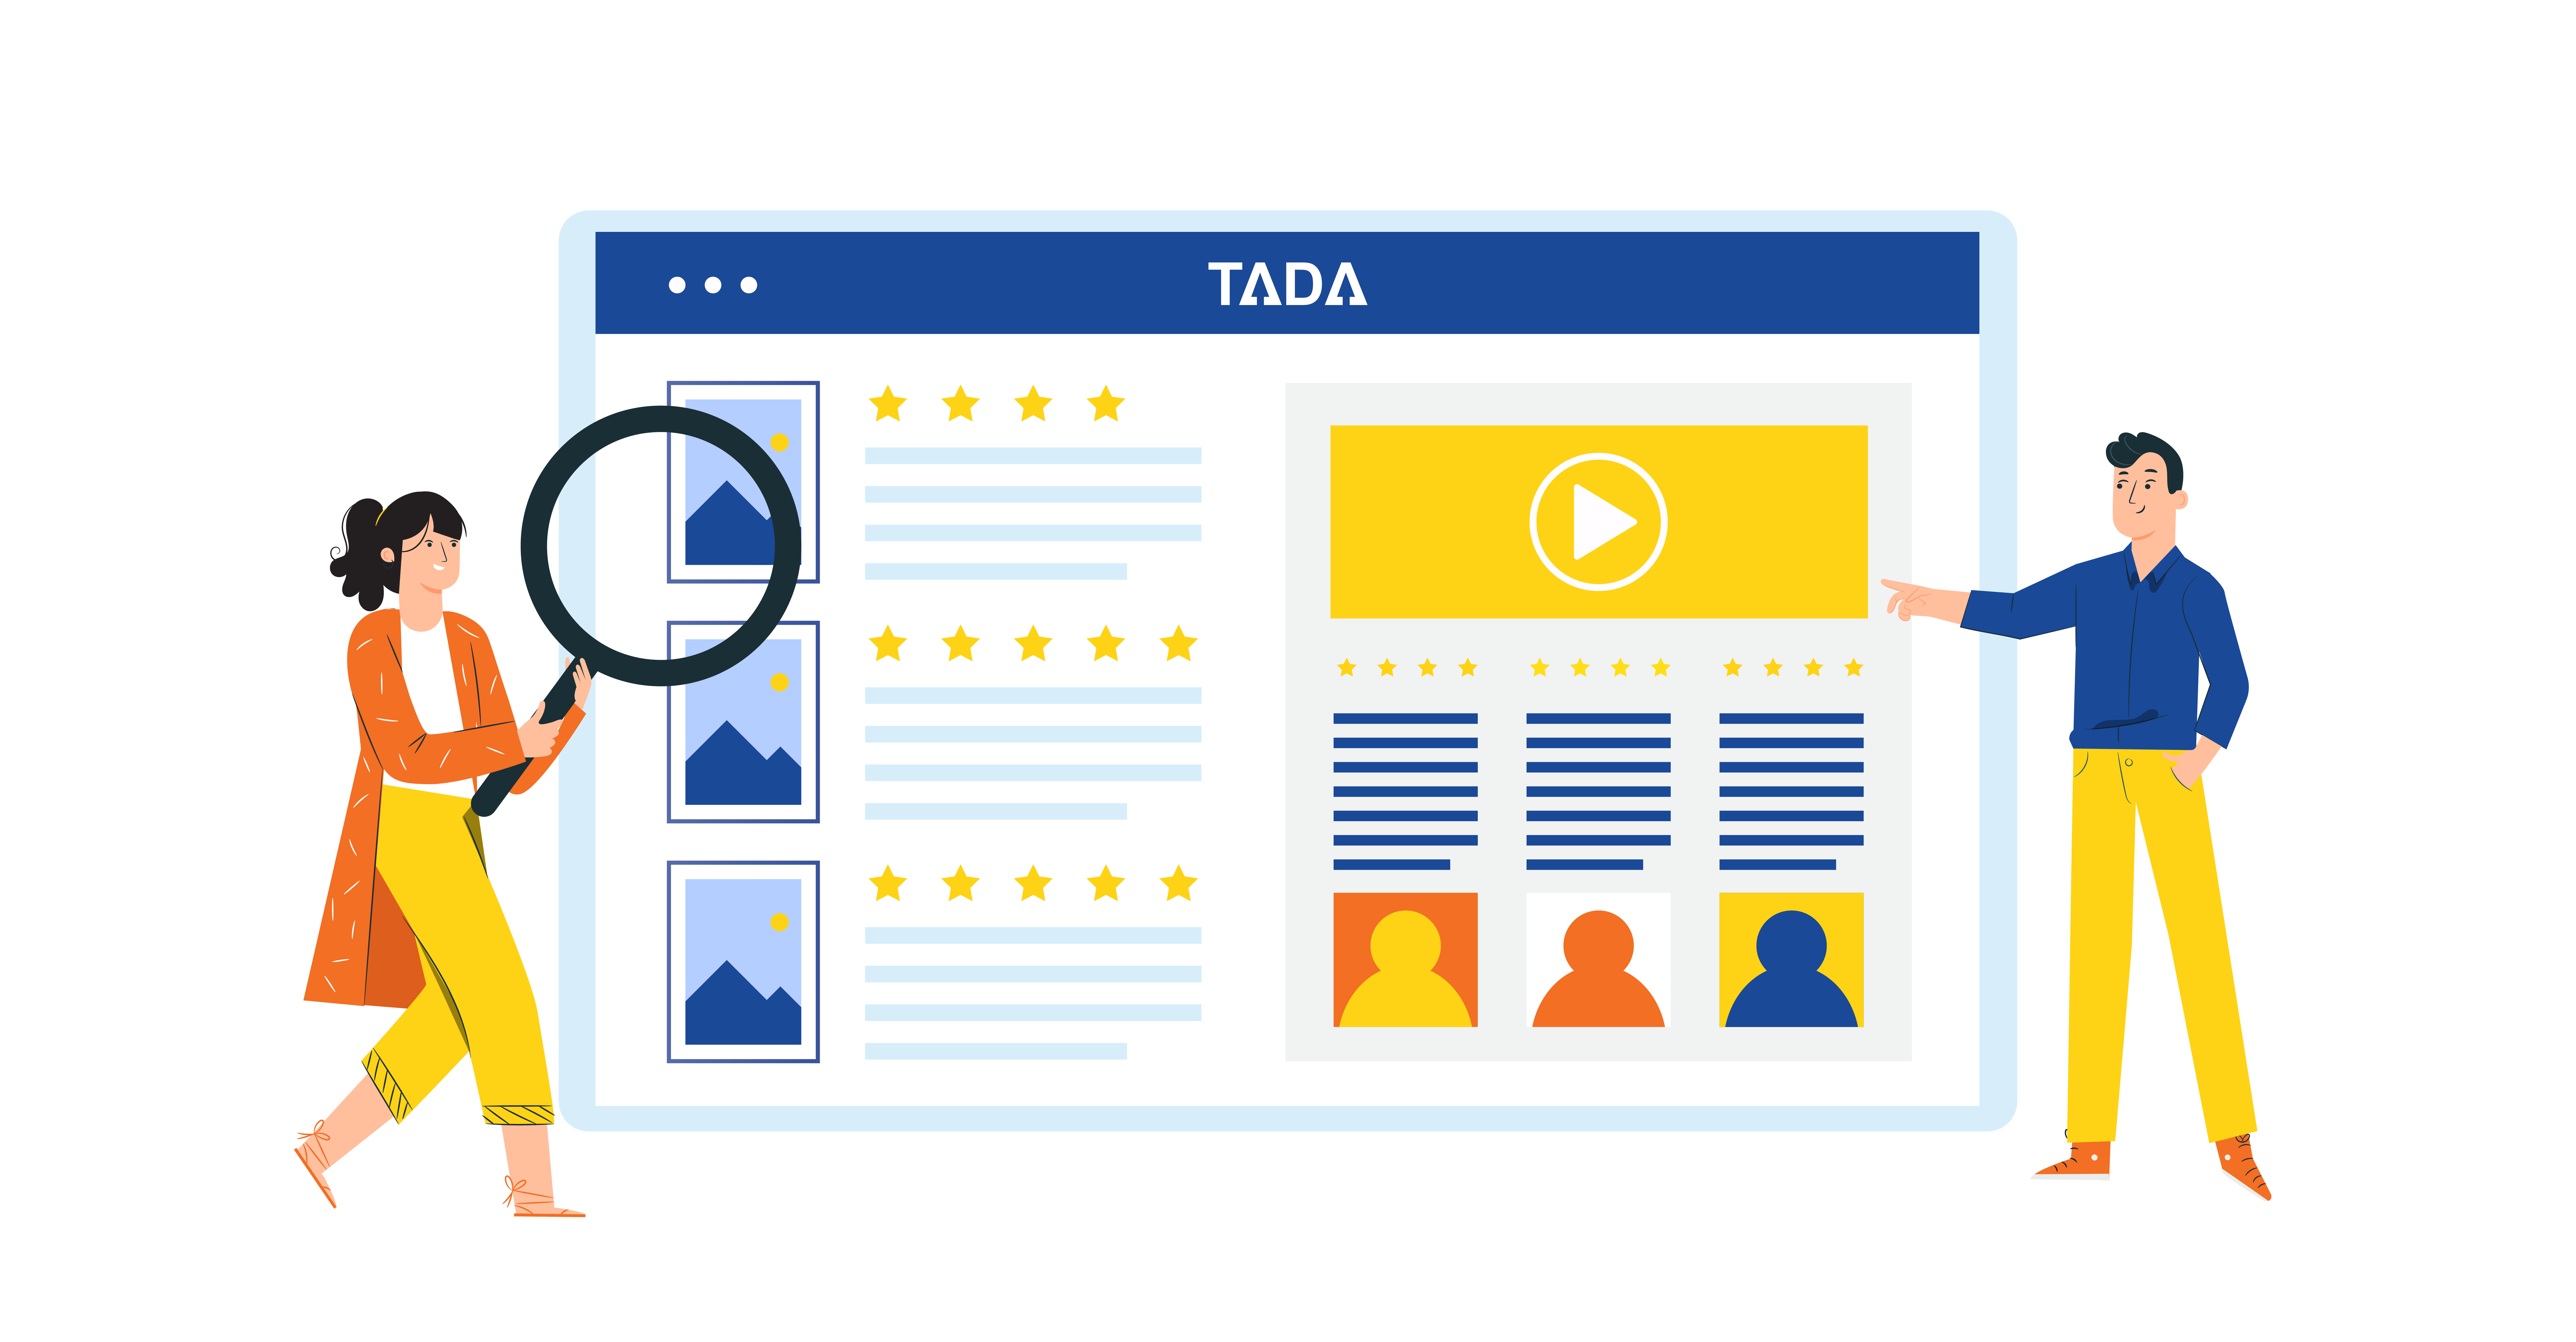 Improve Your Online Reputation Through Google Review (Powered by TADA)